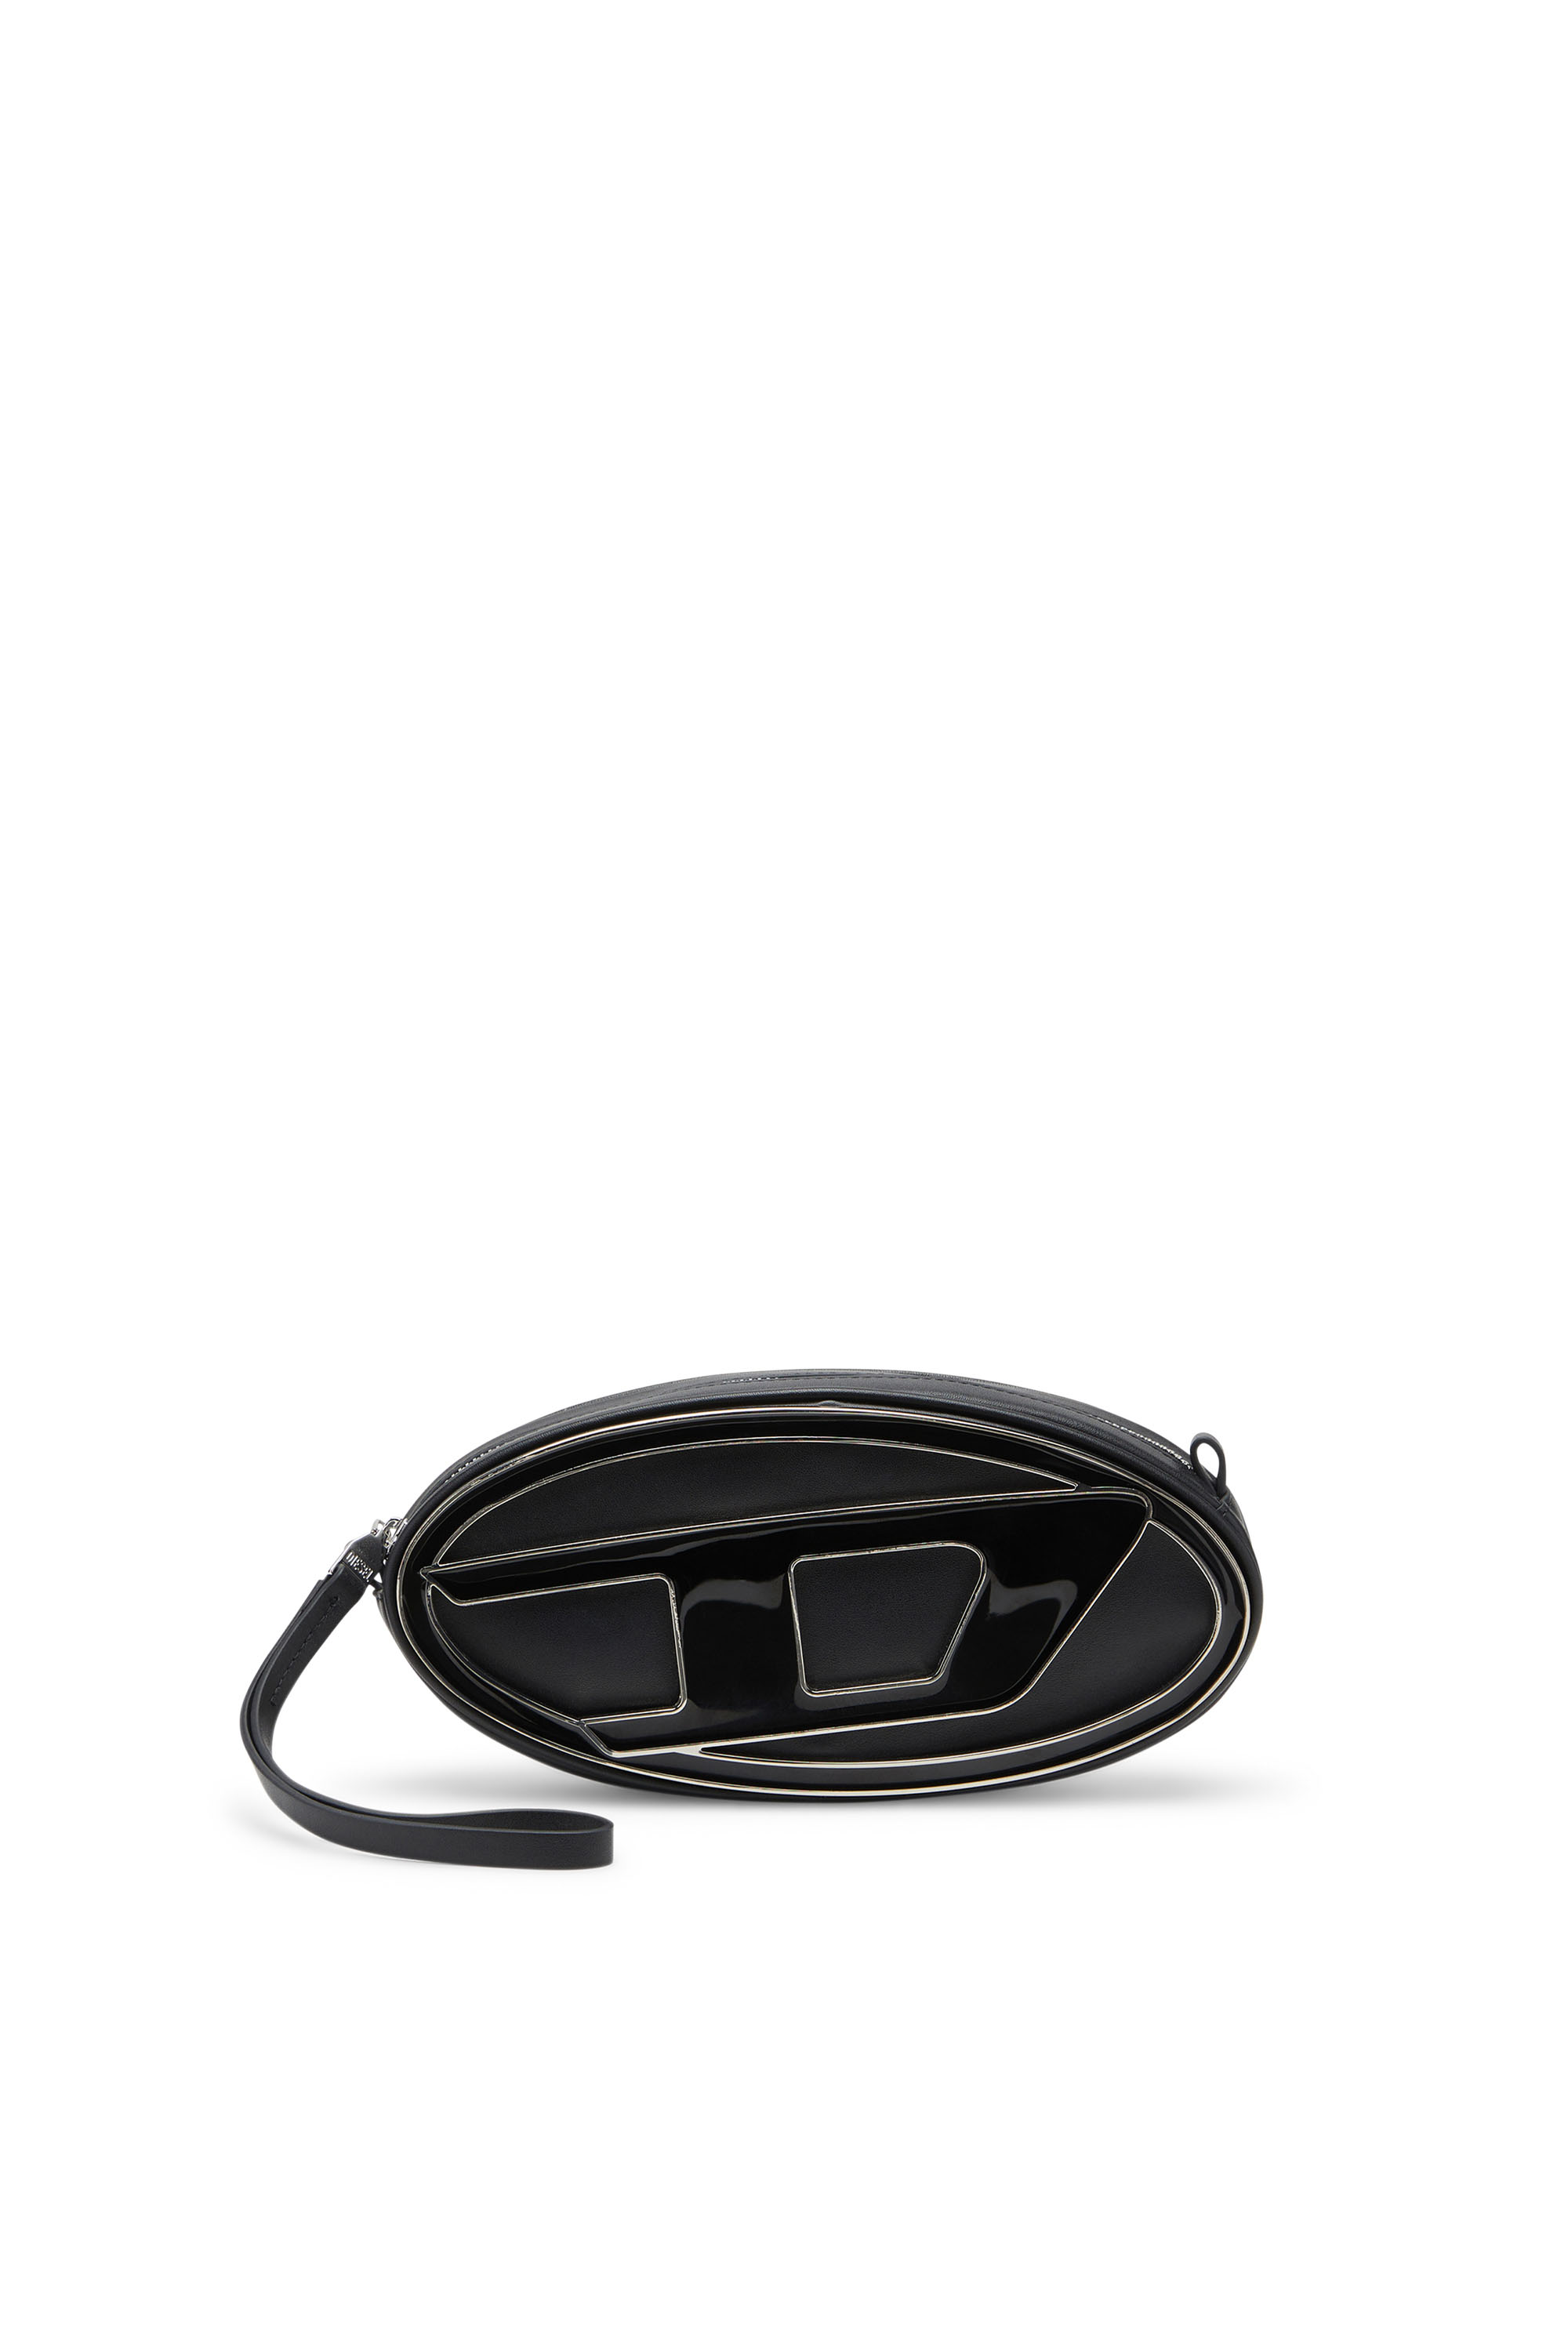 Diesel - 1DR-Pouch - Small leather crossbody with logo plaque - Crossbody Bags - Woman - Black